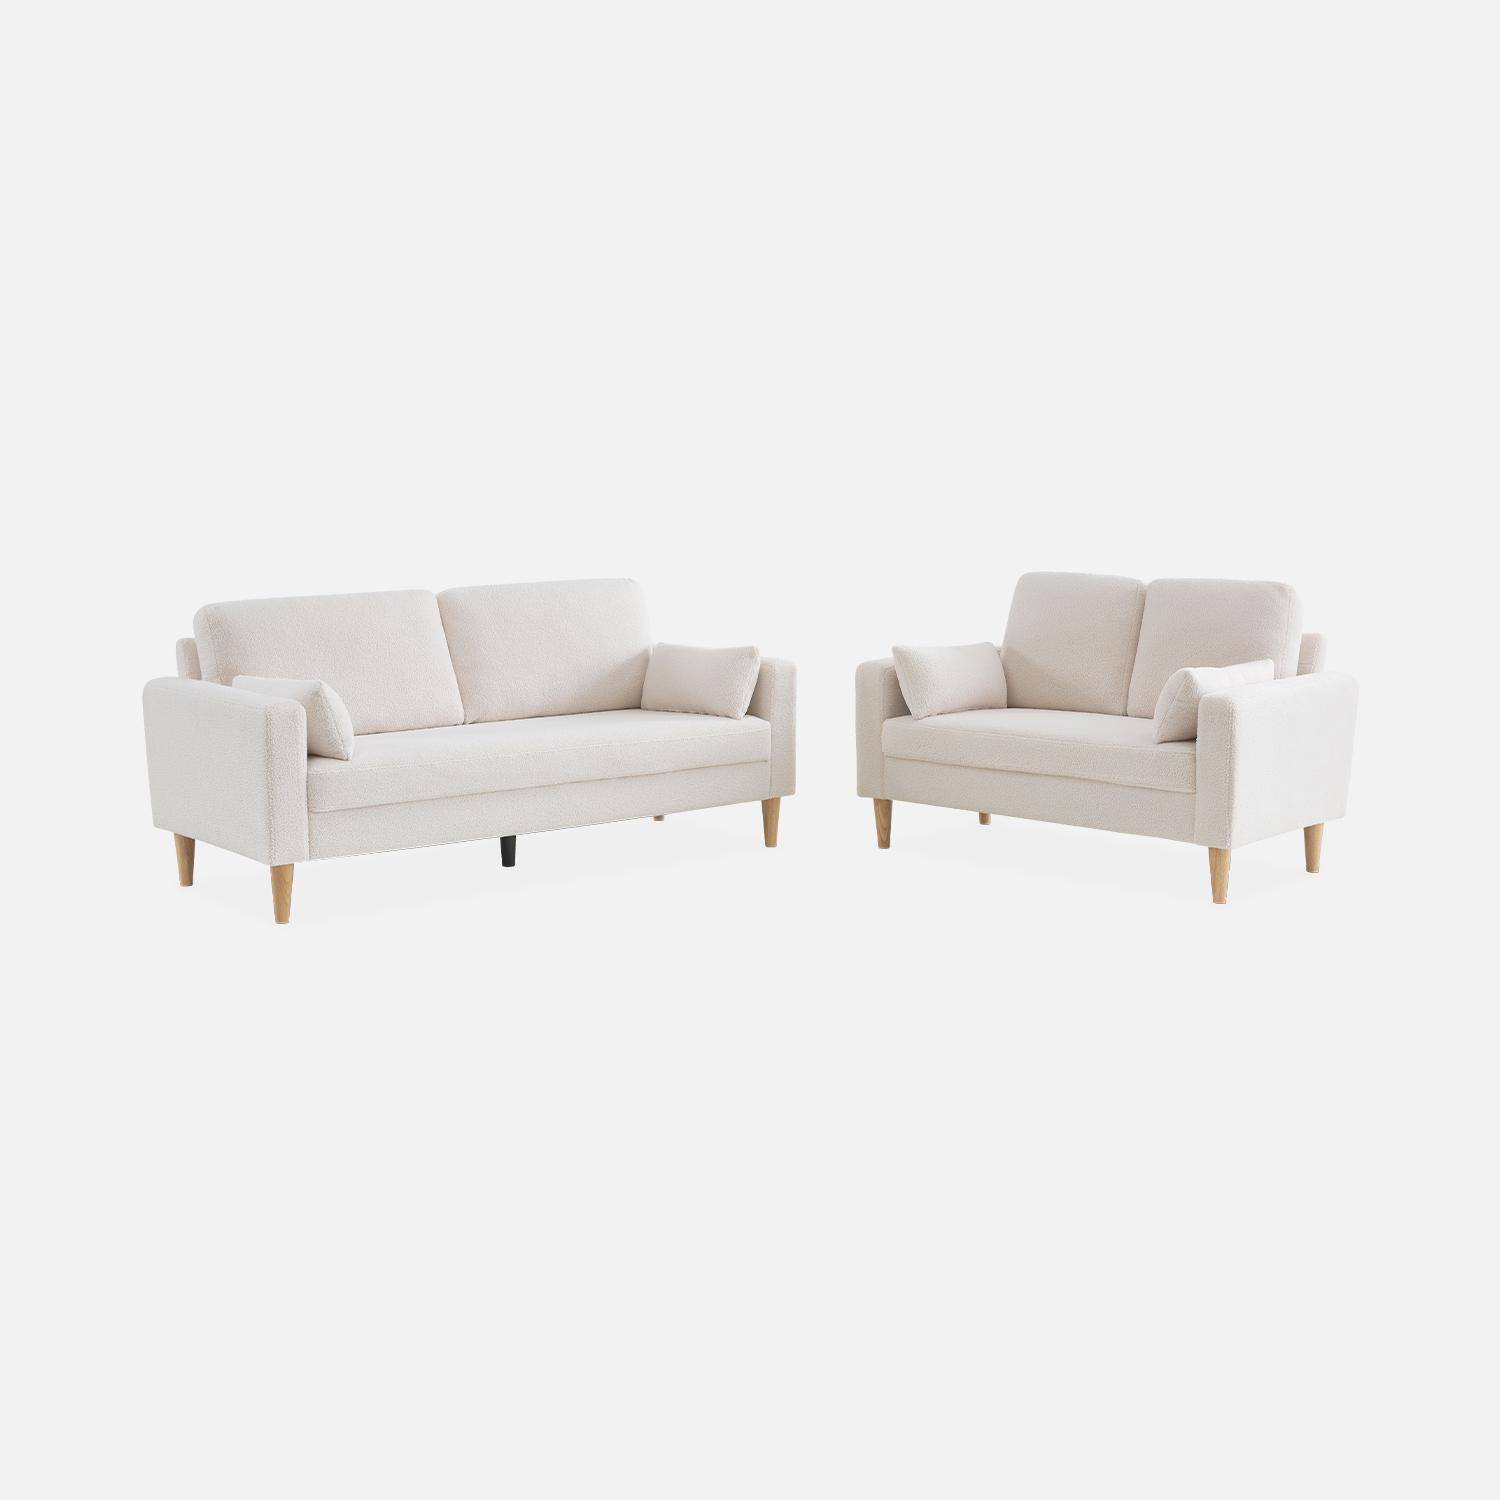 Large 3-seater sofa Scandi-style with wooden legs - Bjorn - white boucle,sweeek,Photo6